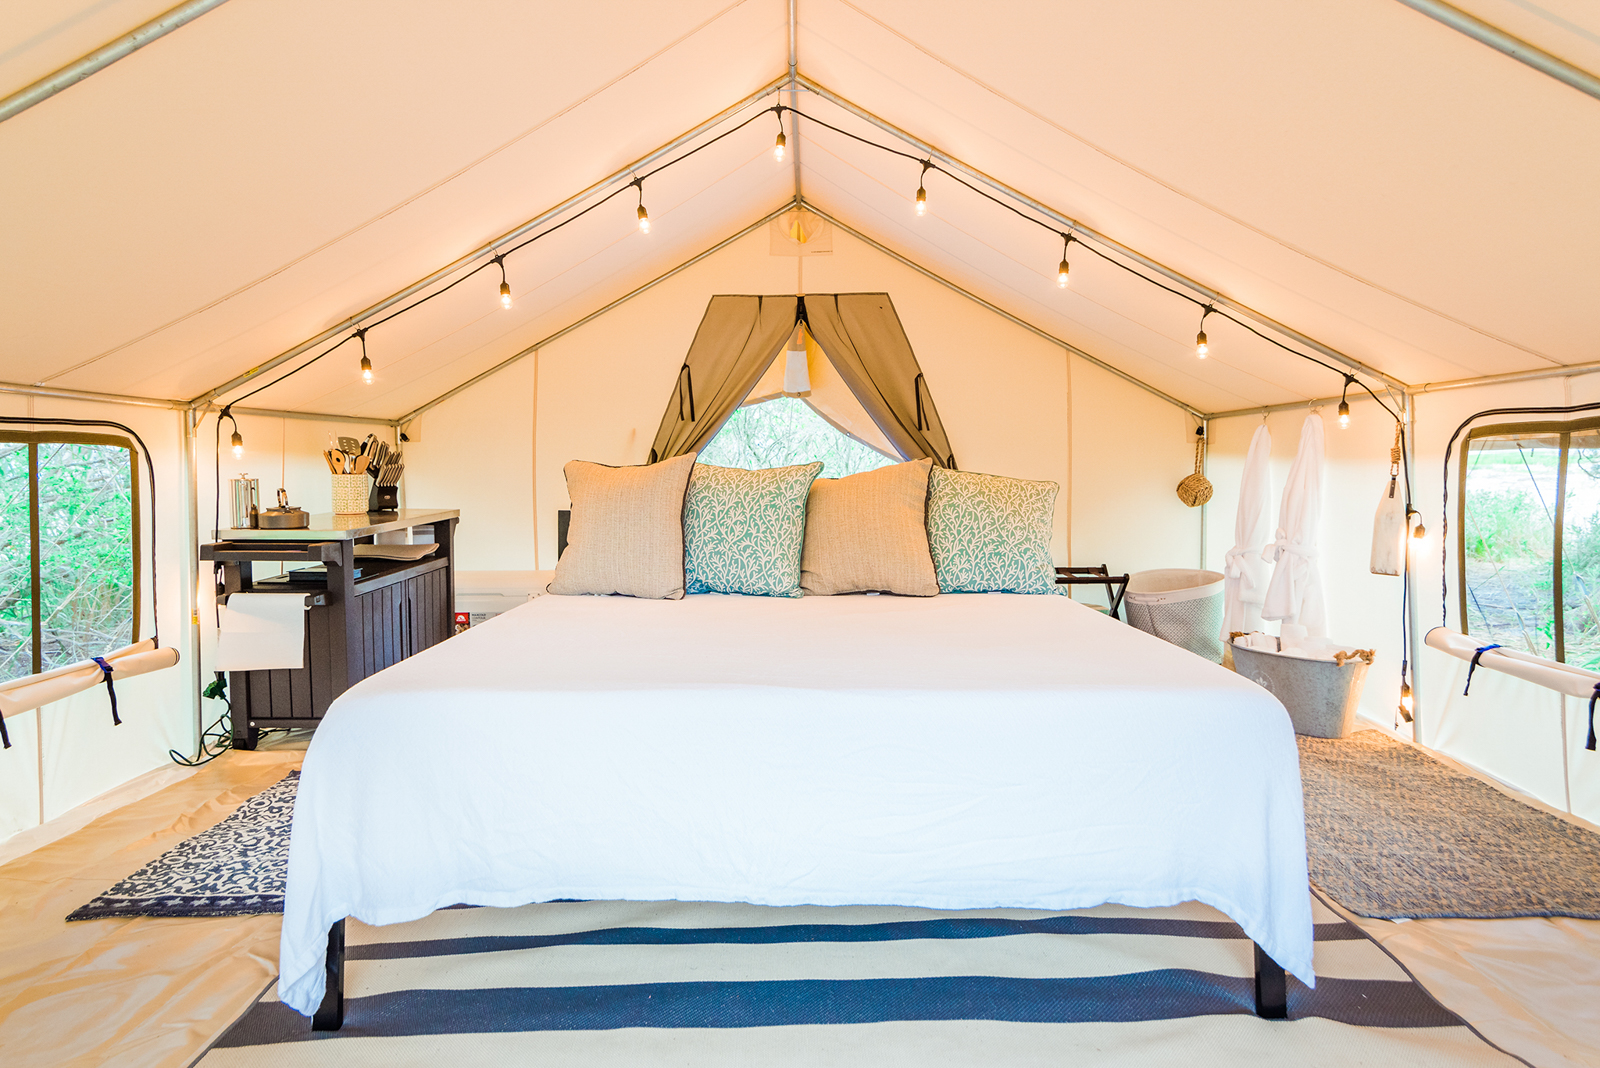 7 Unique & Glamorous Glamping Destinations in the South, U.S.A.